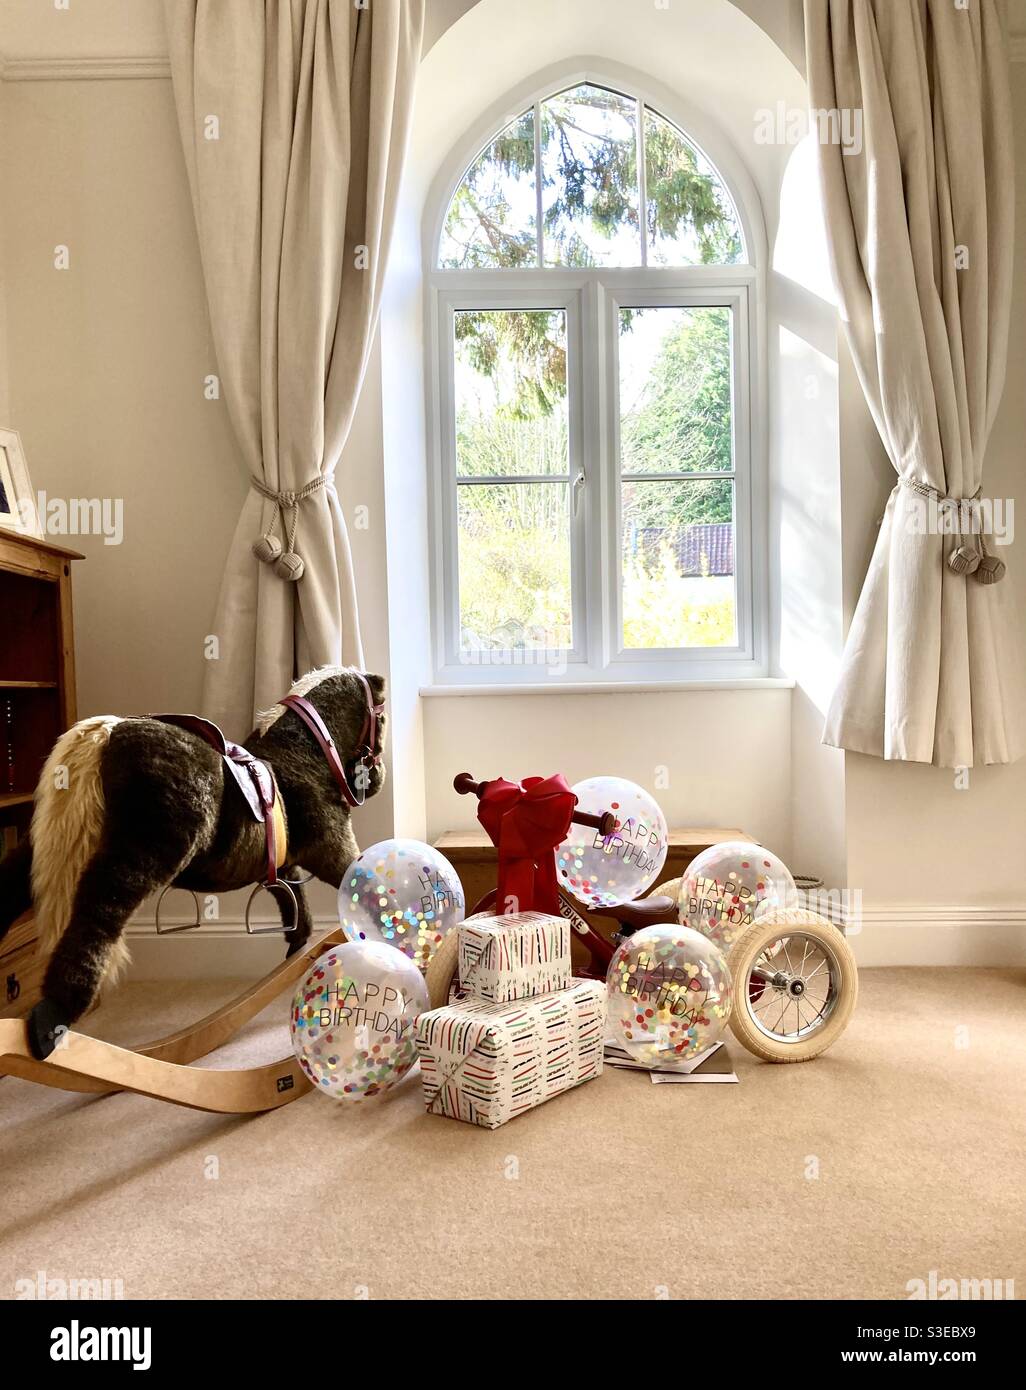 First birthday presents (bike and rocking horse) and balloons by the window Stock Photo